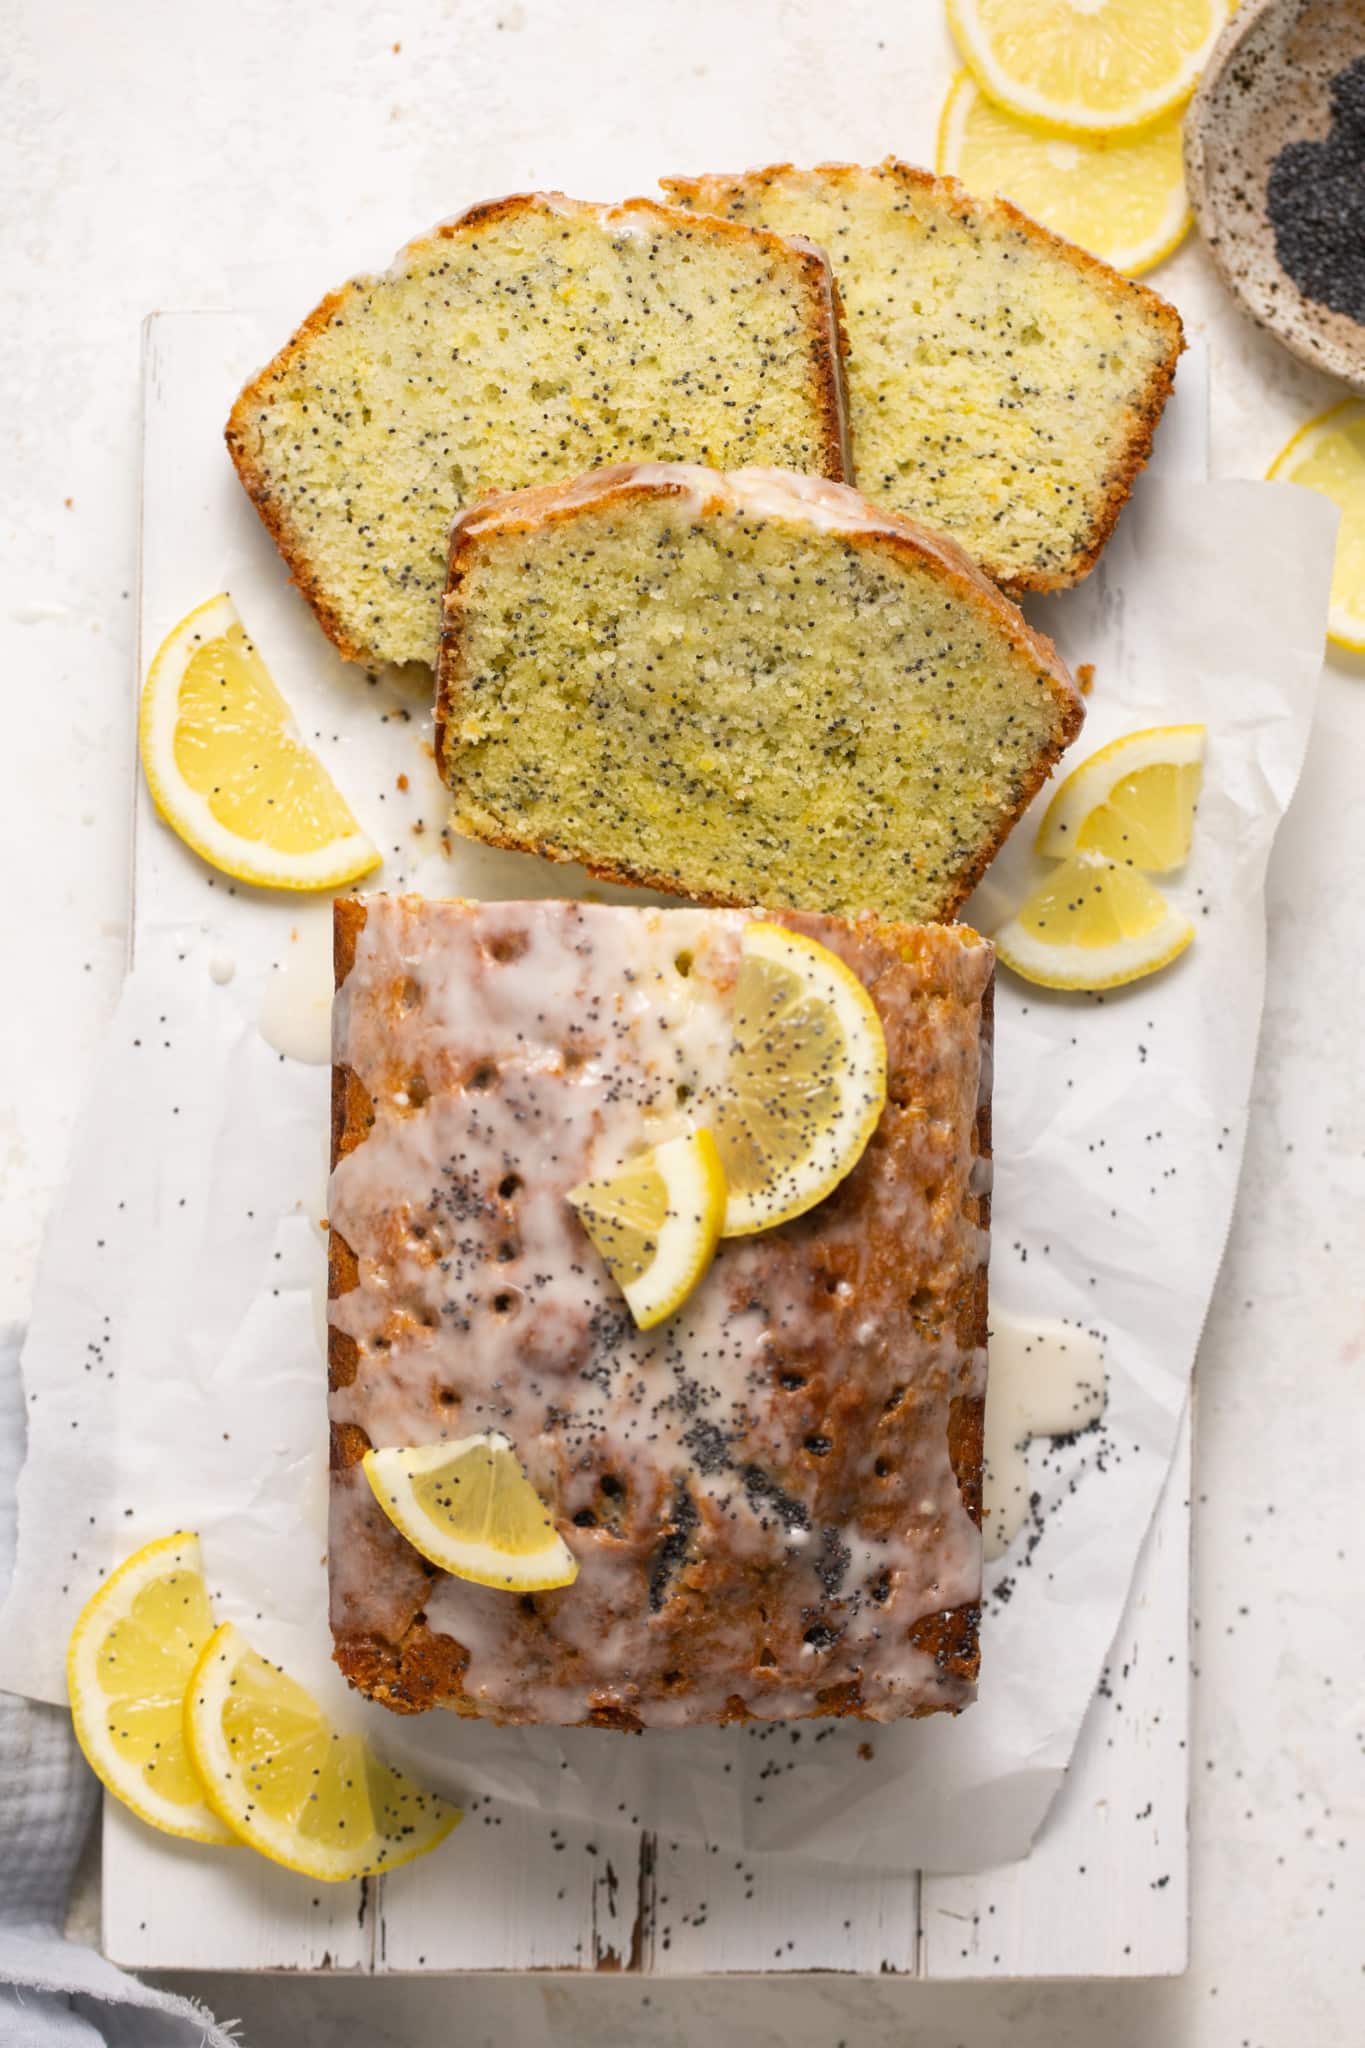 lemon poppyseed cake on parchment paper with a glaze on top.